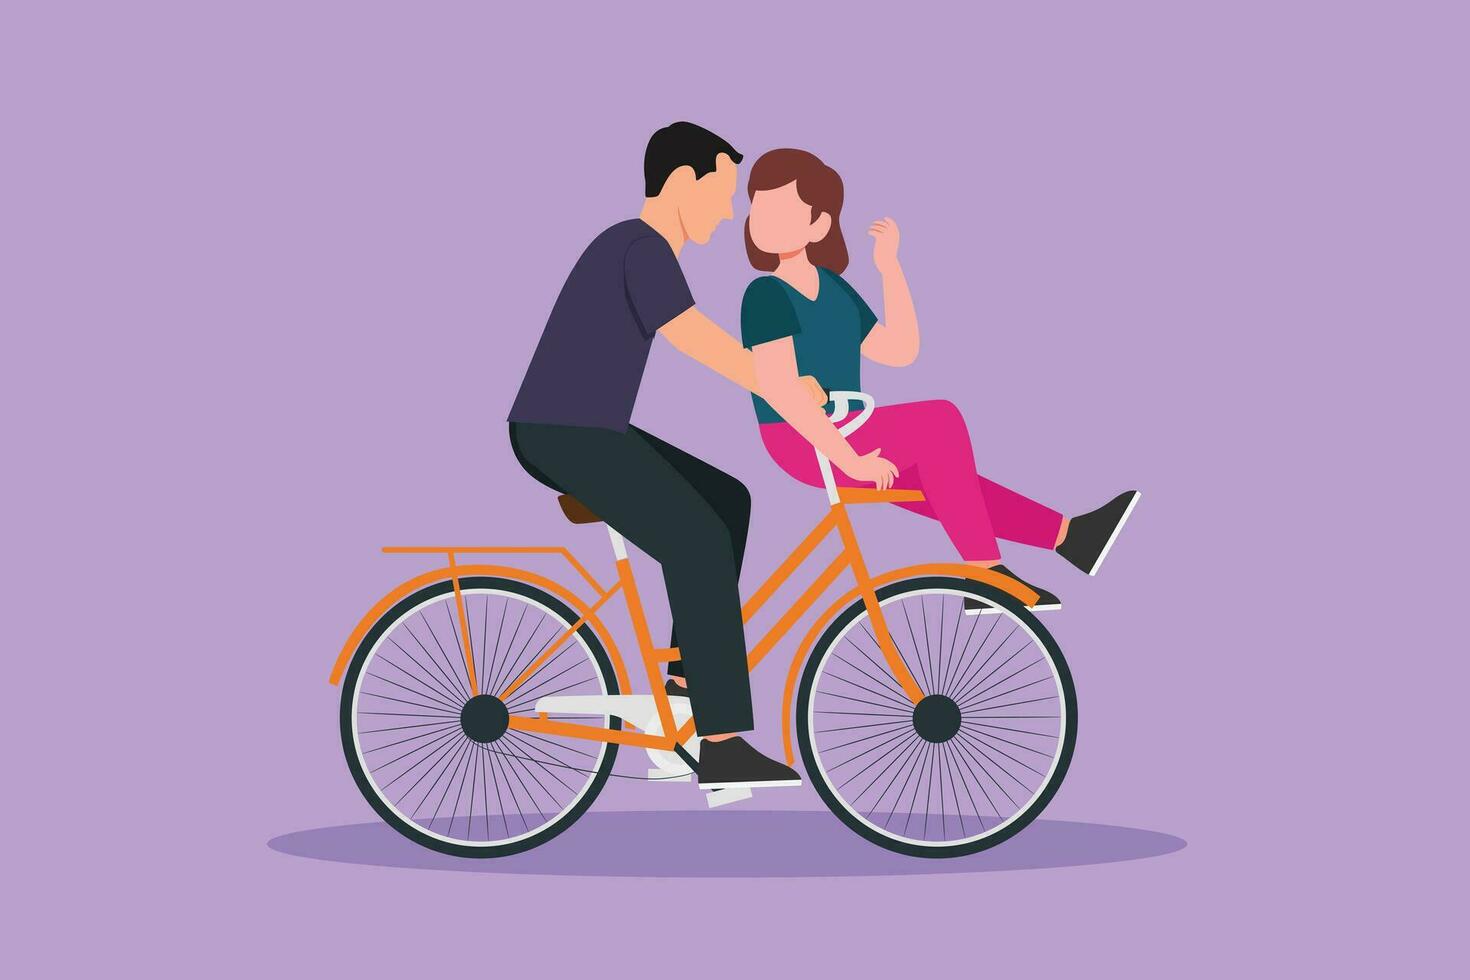 Character flat drawing cute romantic couple on date riding bicycle. Young man and woman in love. Happy married couple cycling together. Lovely relationship concept. Cartoon design vector illustration